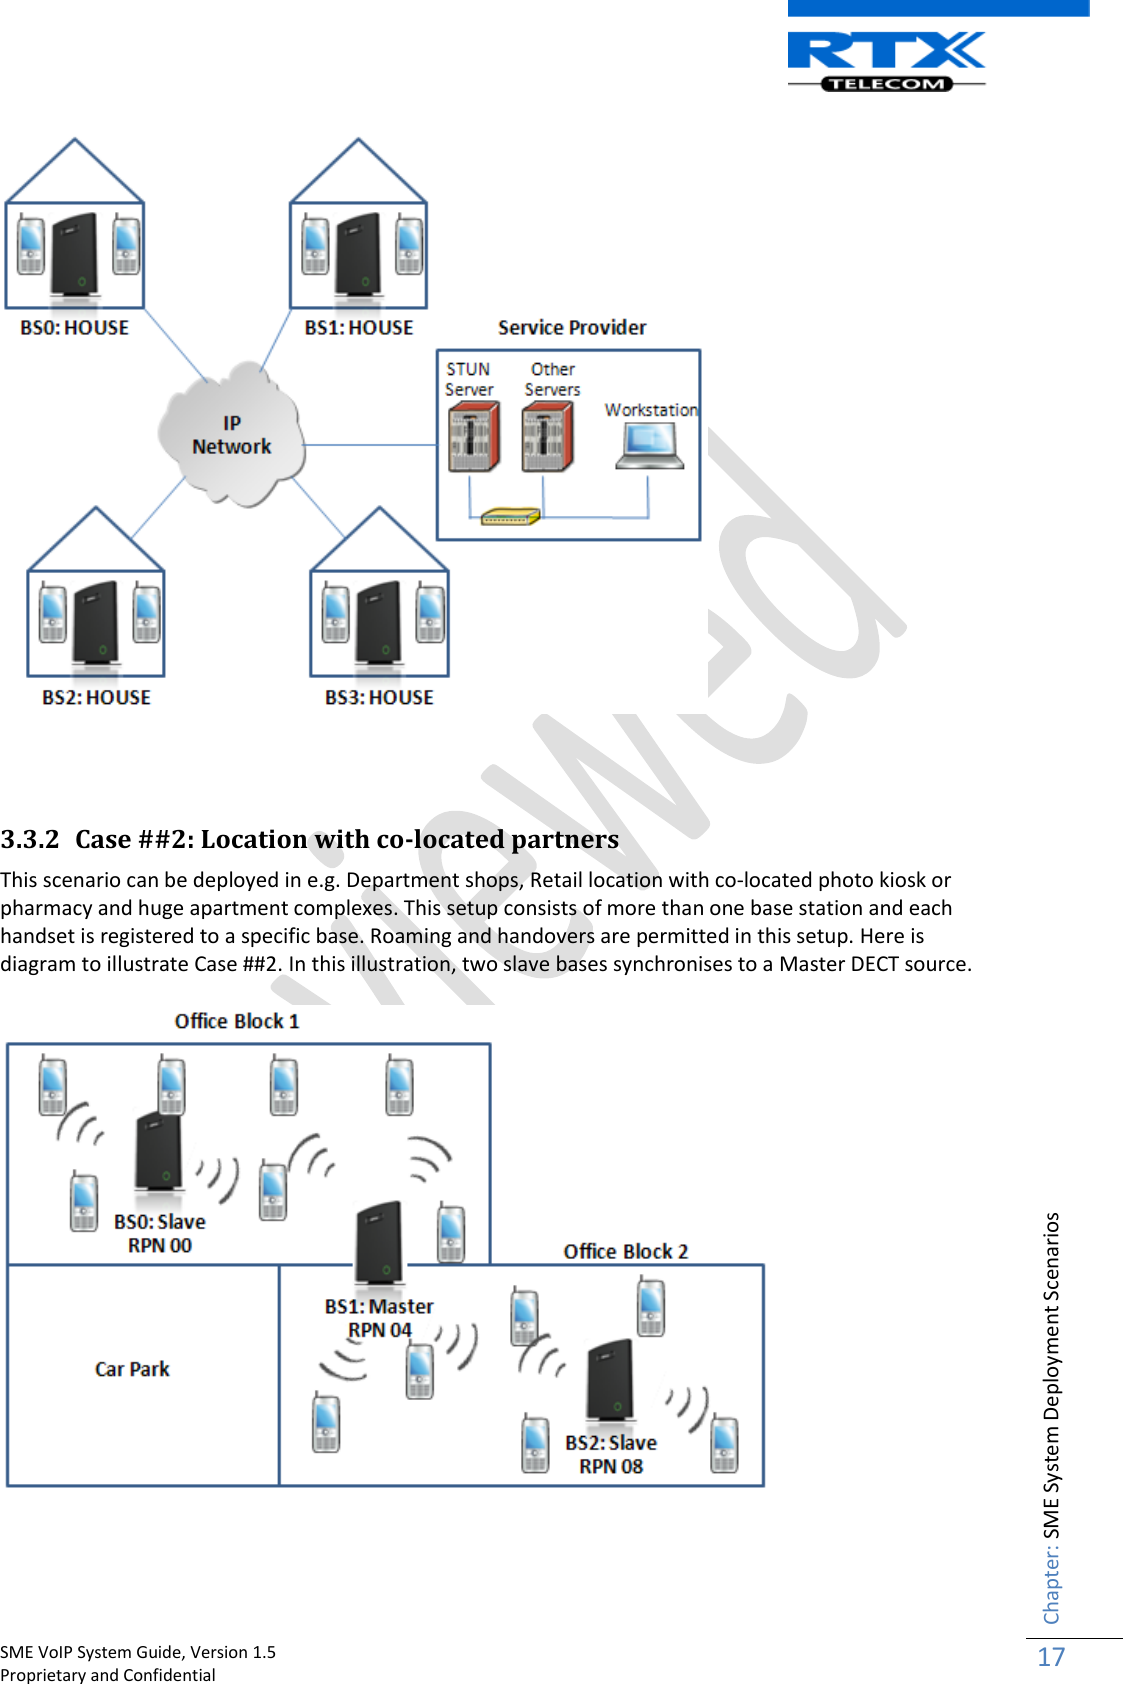    SME VoIP System Guide, Version 1.5                                                                                                                                                          Proprietary and Confidential    Chapter: SME System Deployment Scenarios 17      3.3.2 Case ##2: Location with co-located partners  This scenario can be deployed in e.g. Department shops, Retail location with co-located photo kiosk or pharmacy and huge apartment complexes. This setup consists of more than one base station and each handset is registered to a specific base. Roaming and handovers are permitted in this setup. Here is diagram to illustrate Case ##2. In this illustration, two slave bases synchronises to a Master DECT source.     